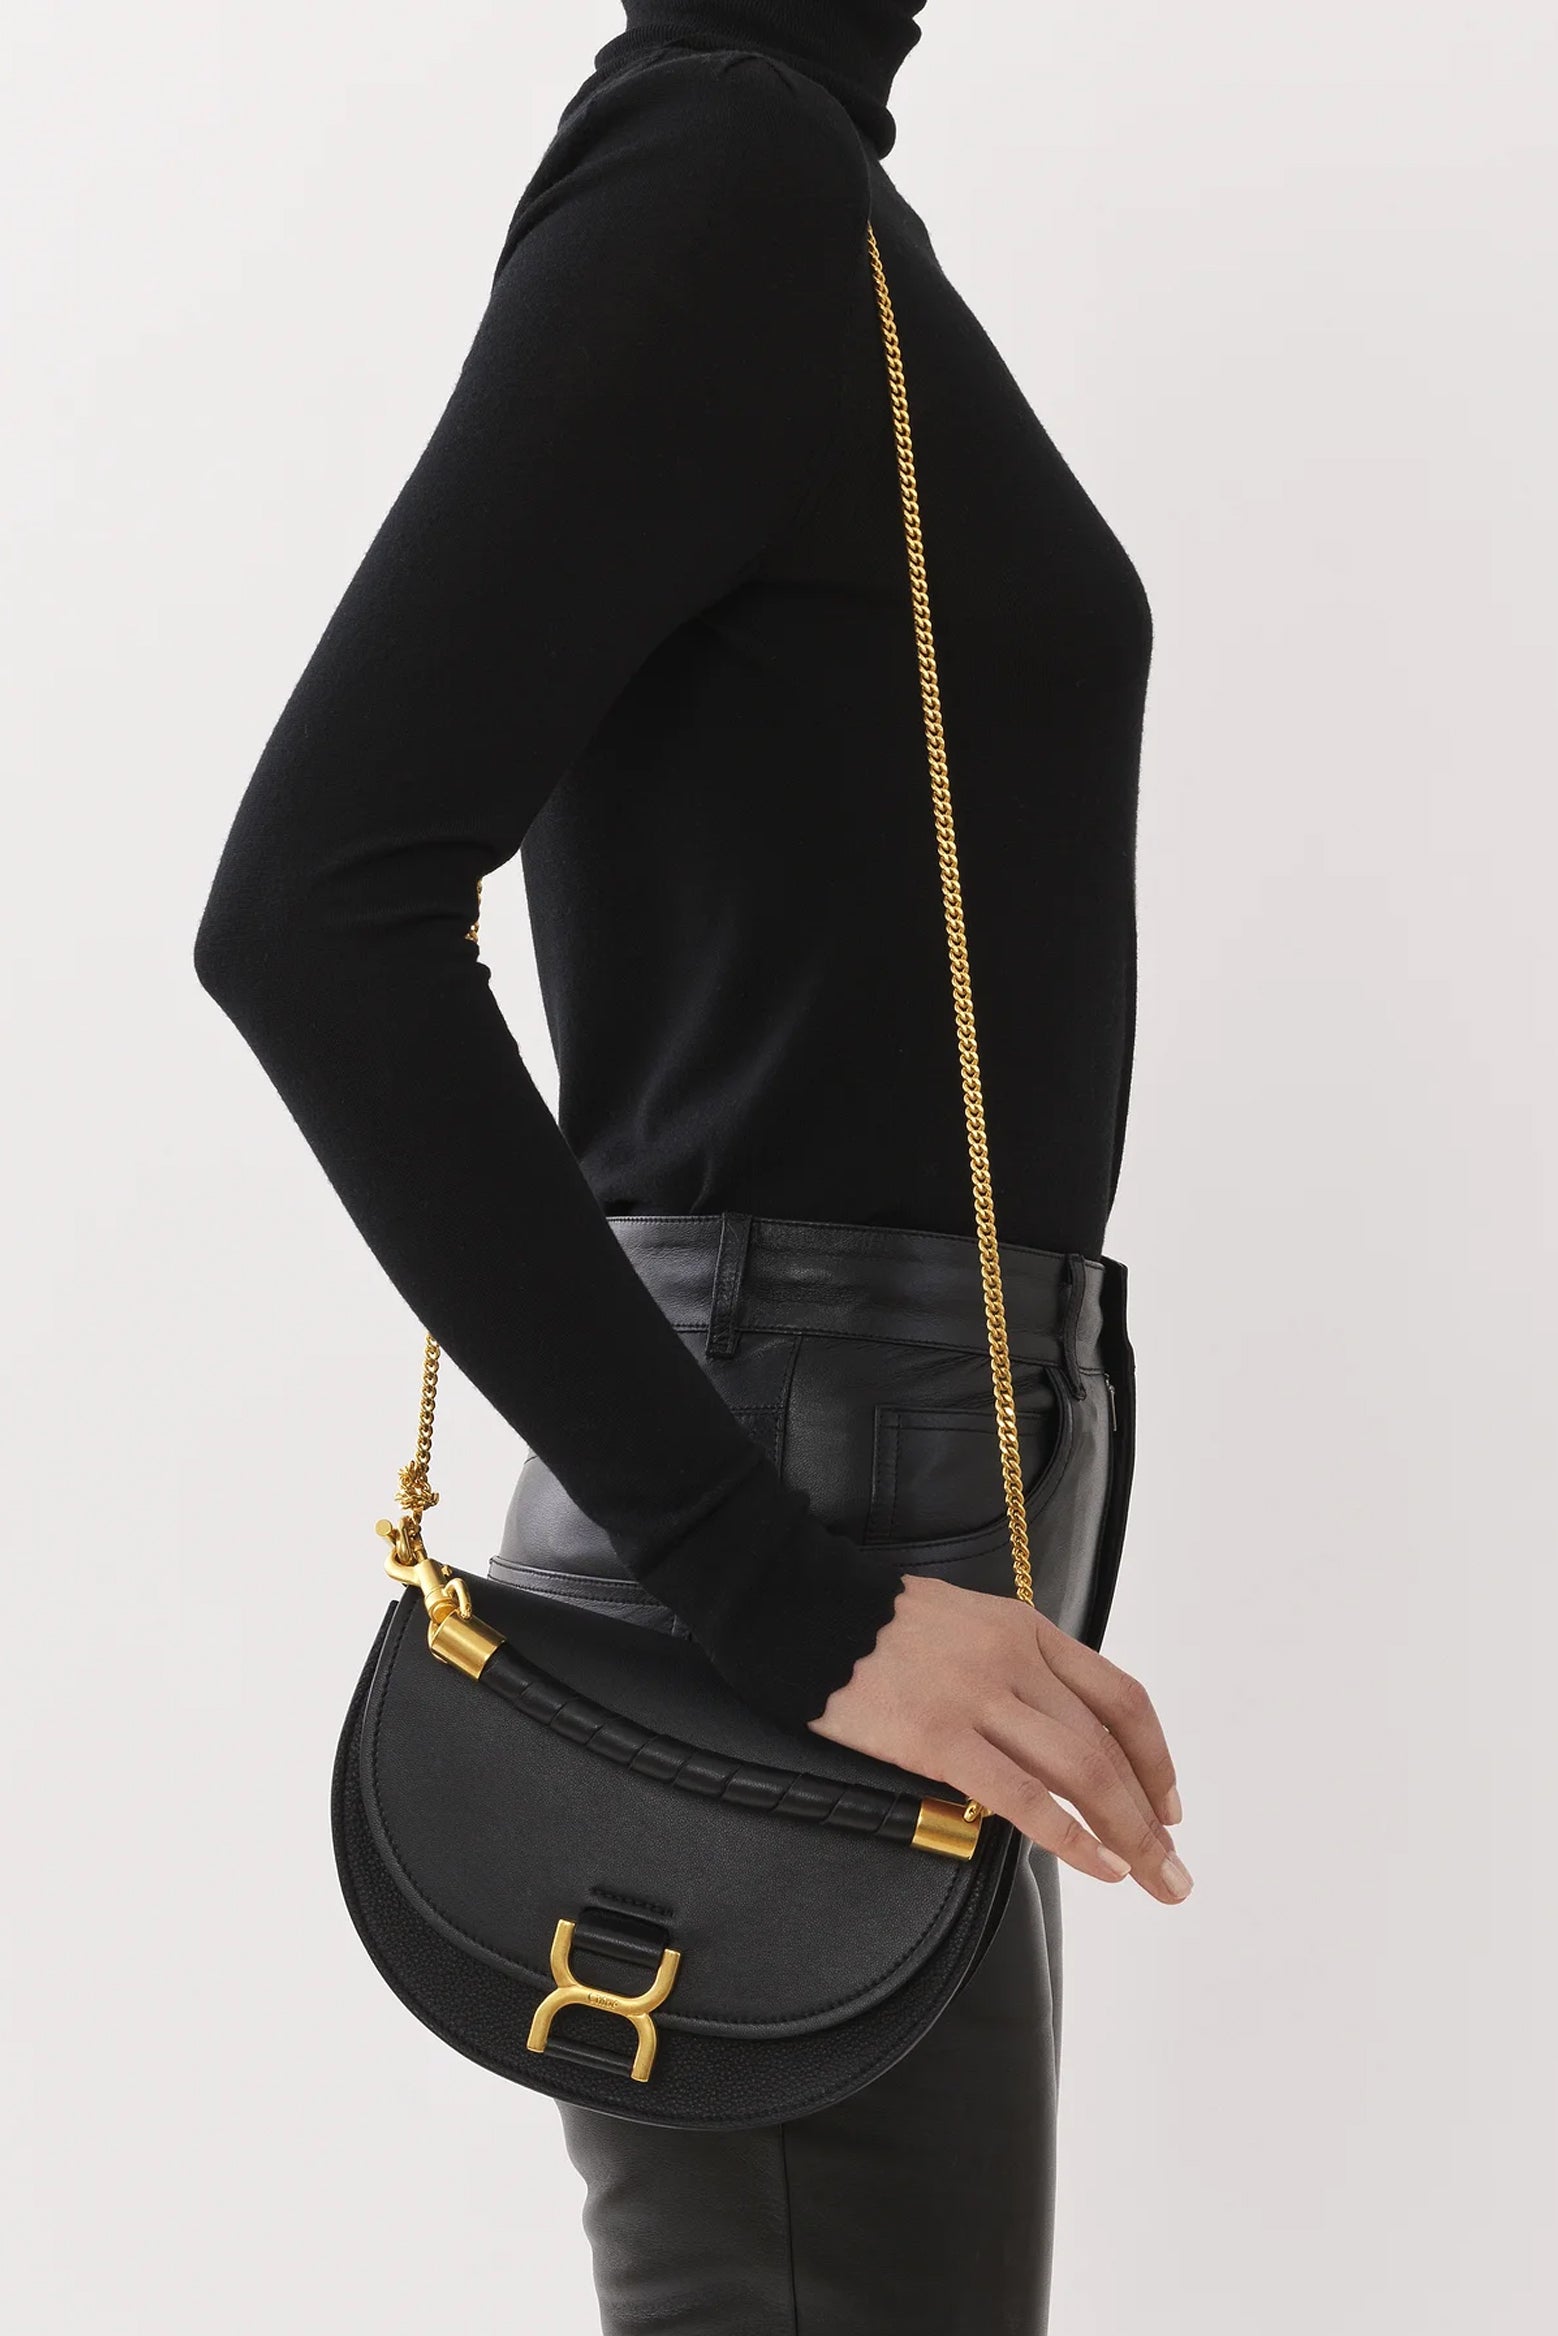 Chloé Marcie Chain Flap Bag in Black available at The New Trend Australia.